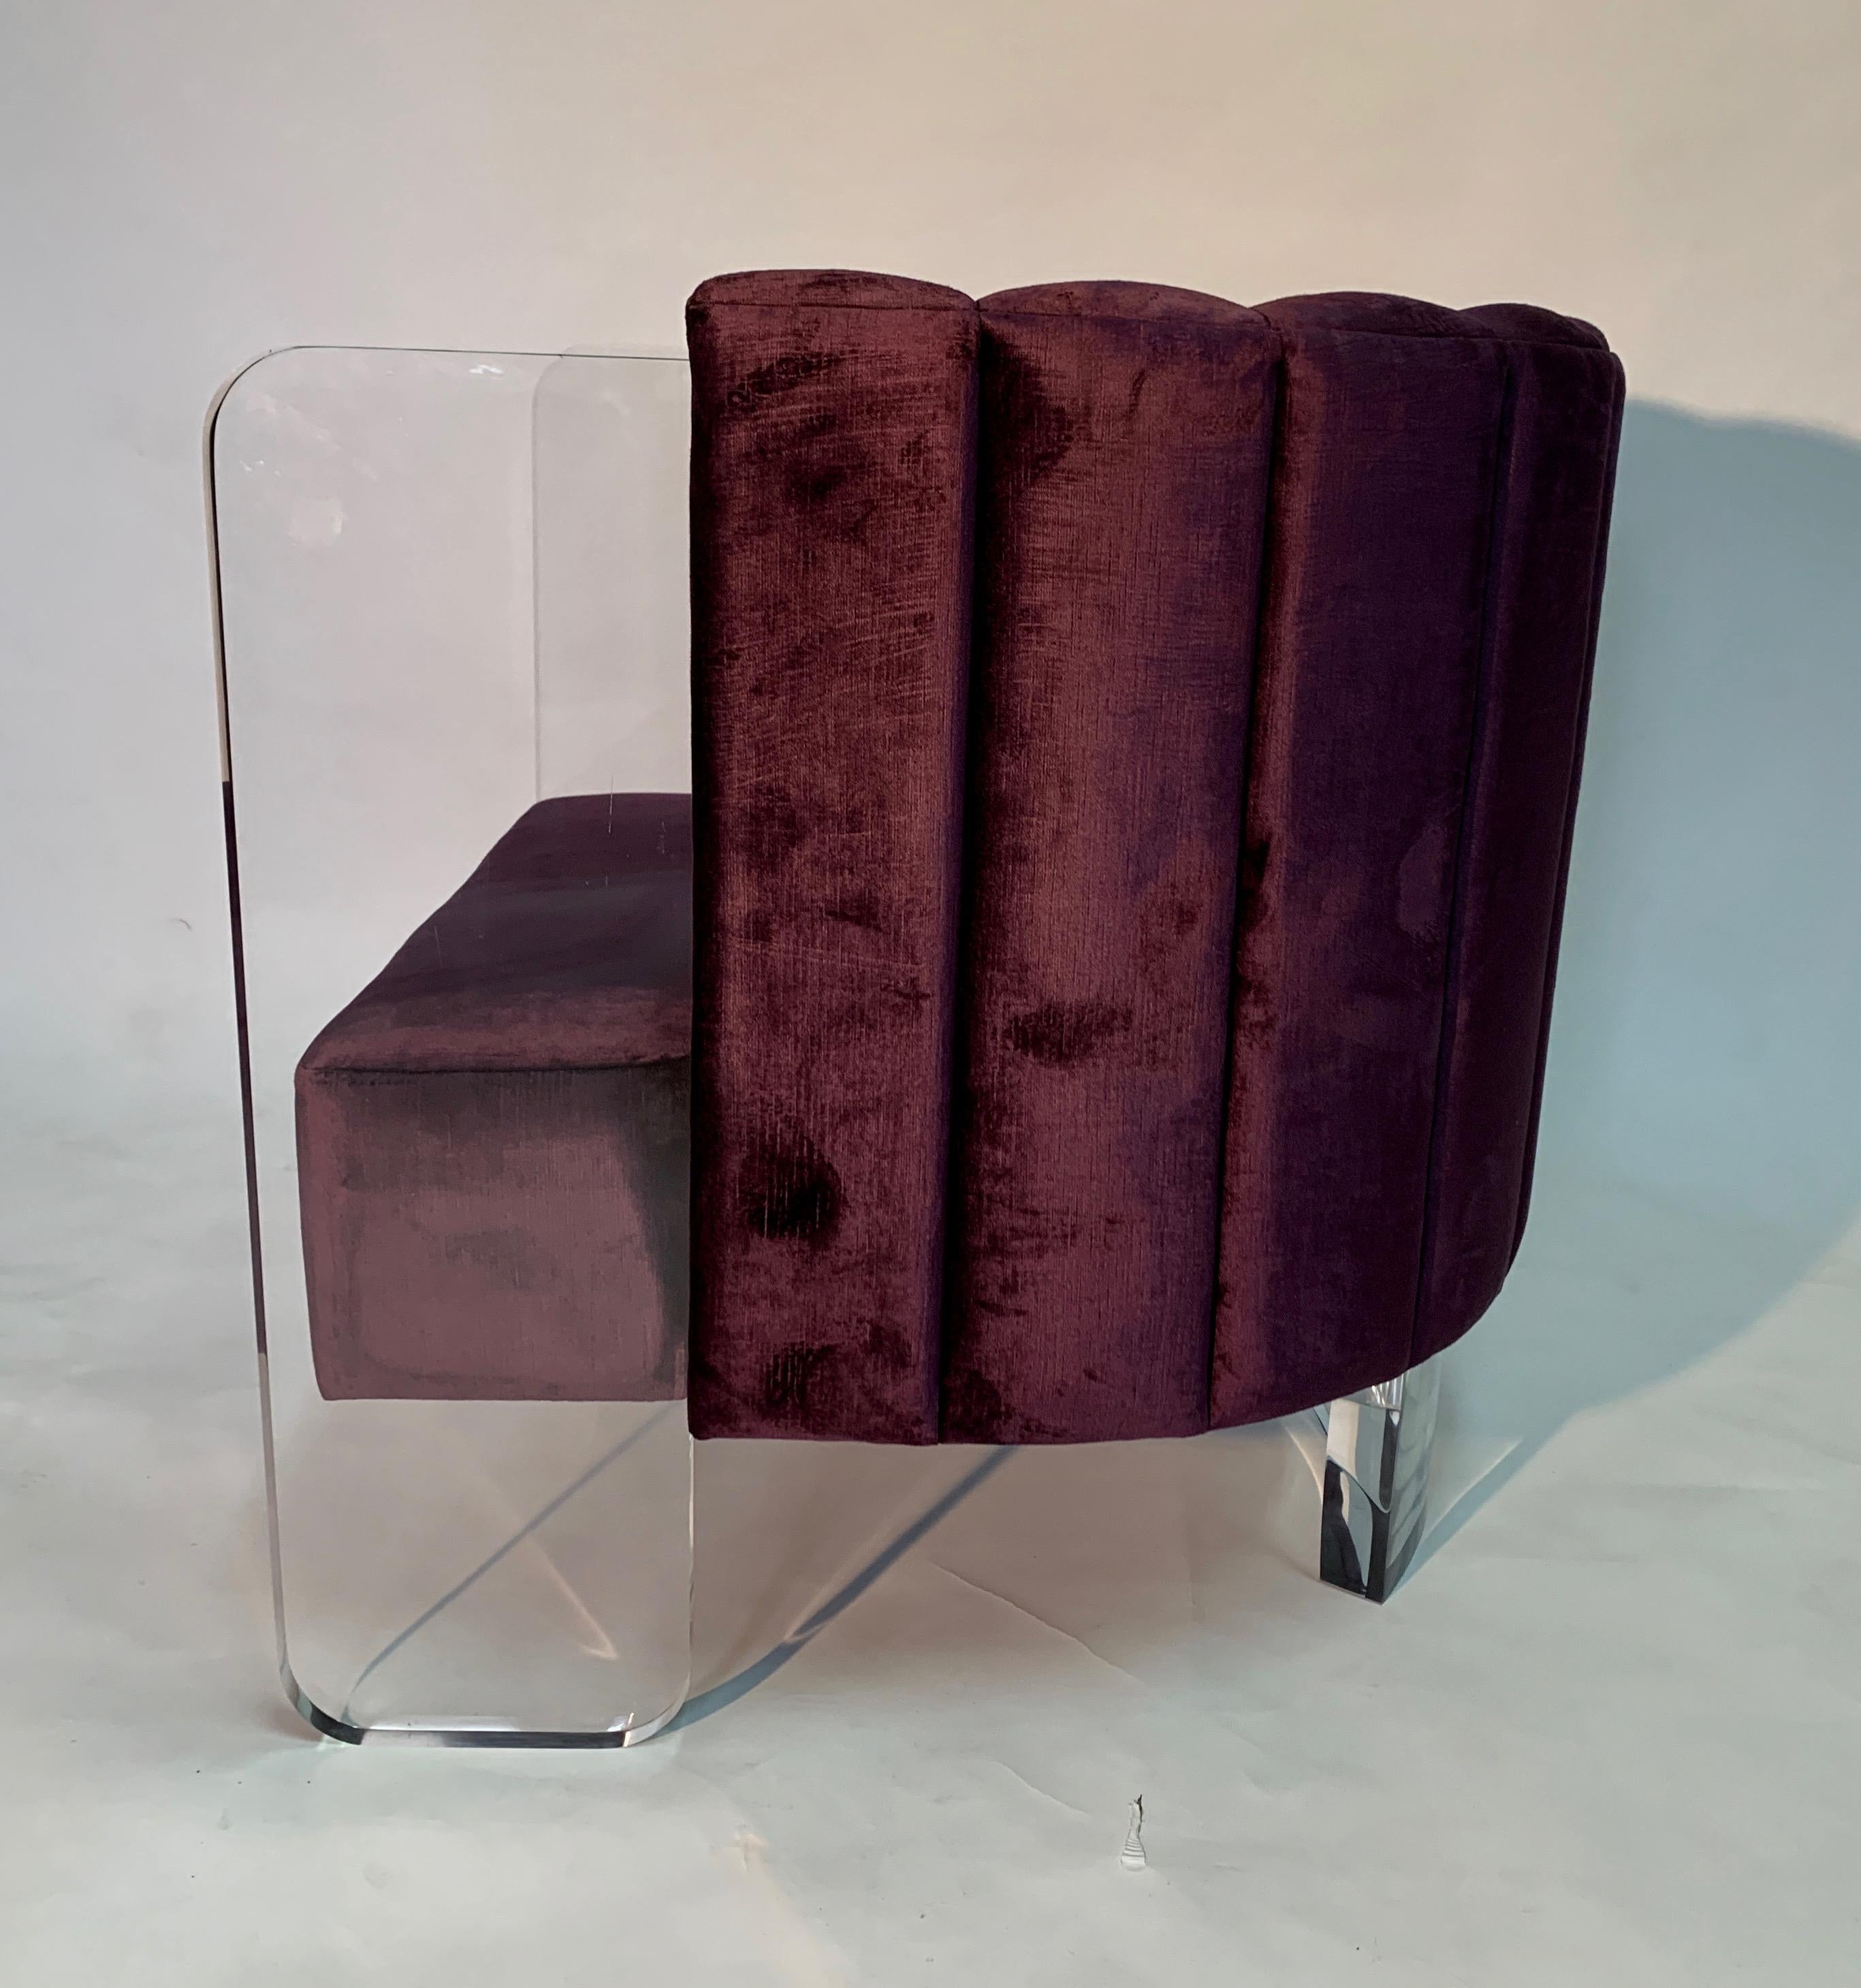 Jonathan Franc's Zebra chair is plush and fully upholstered,. Featuring a channel tufted back cushion and exterior. This lounge chair has clear acrylic arms and a curved acrylic back leg. The fabric is a Purple Velvet. Seat height 16 1/2